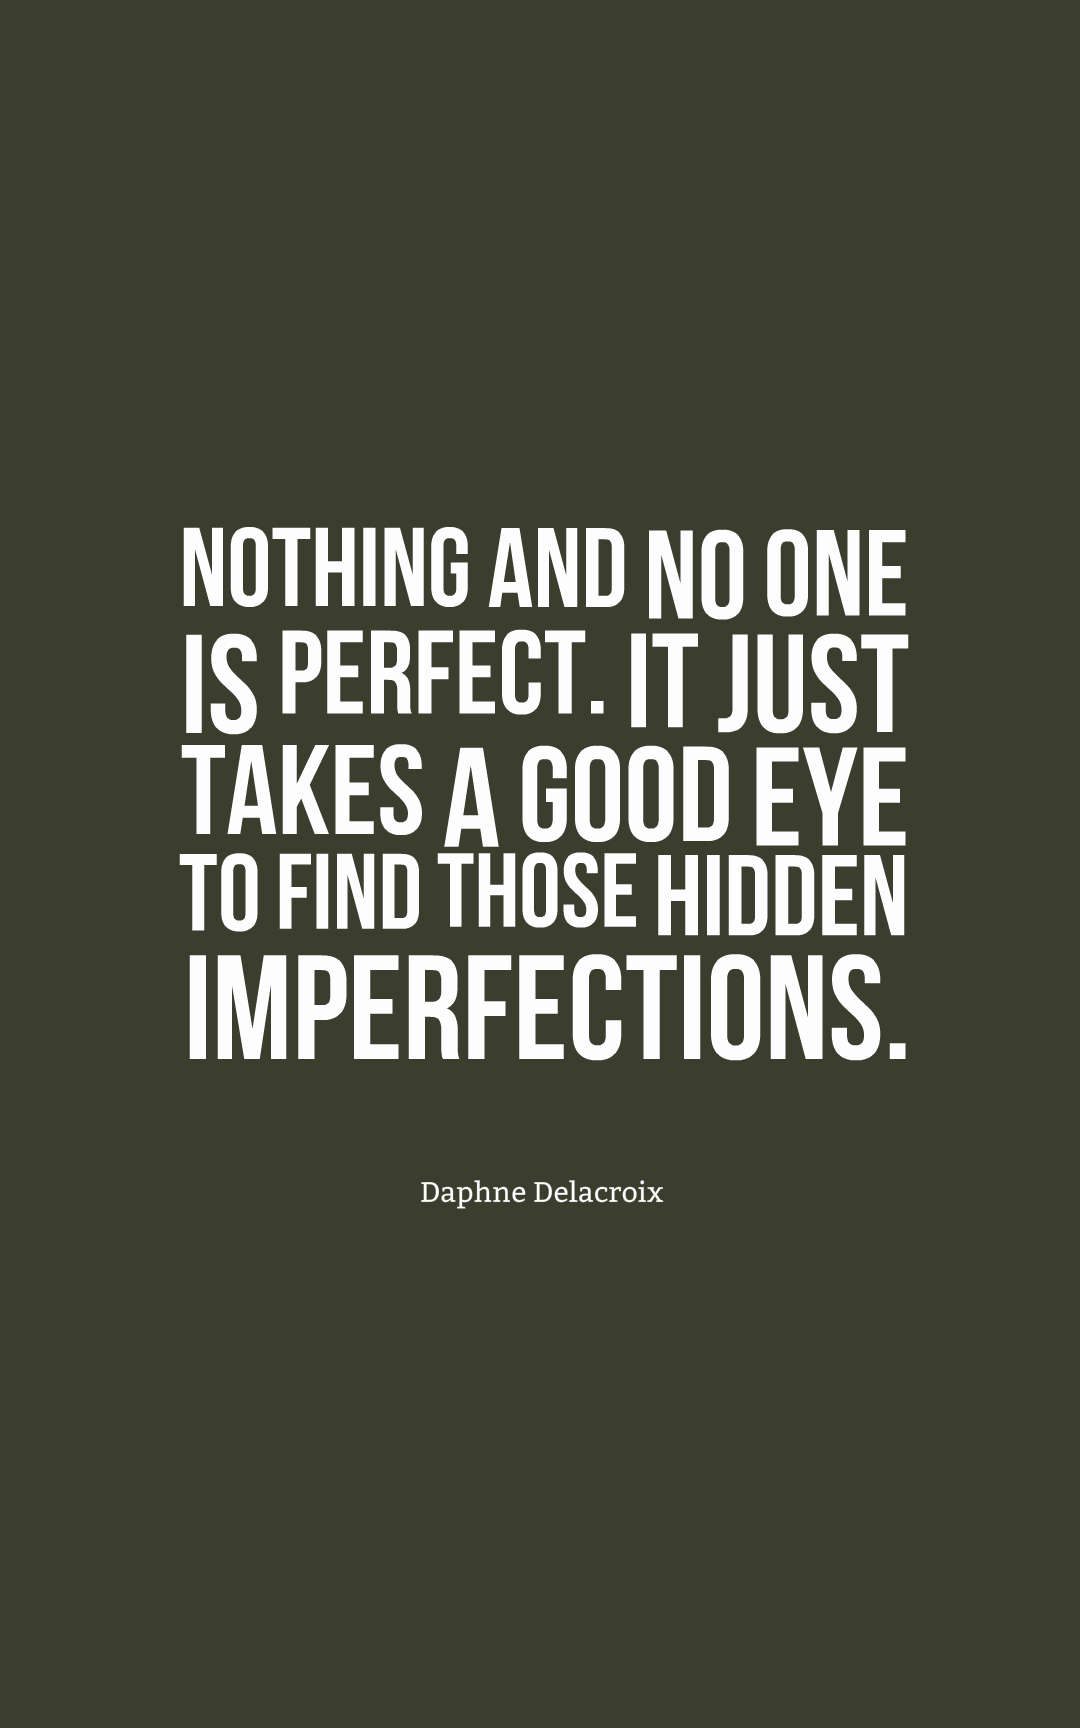 Nothing and no one is perfect. It just takes a good eye to find those hidden imperfections.